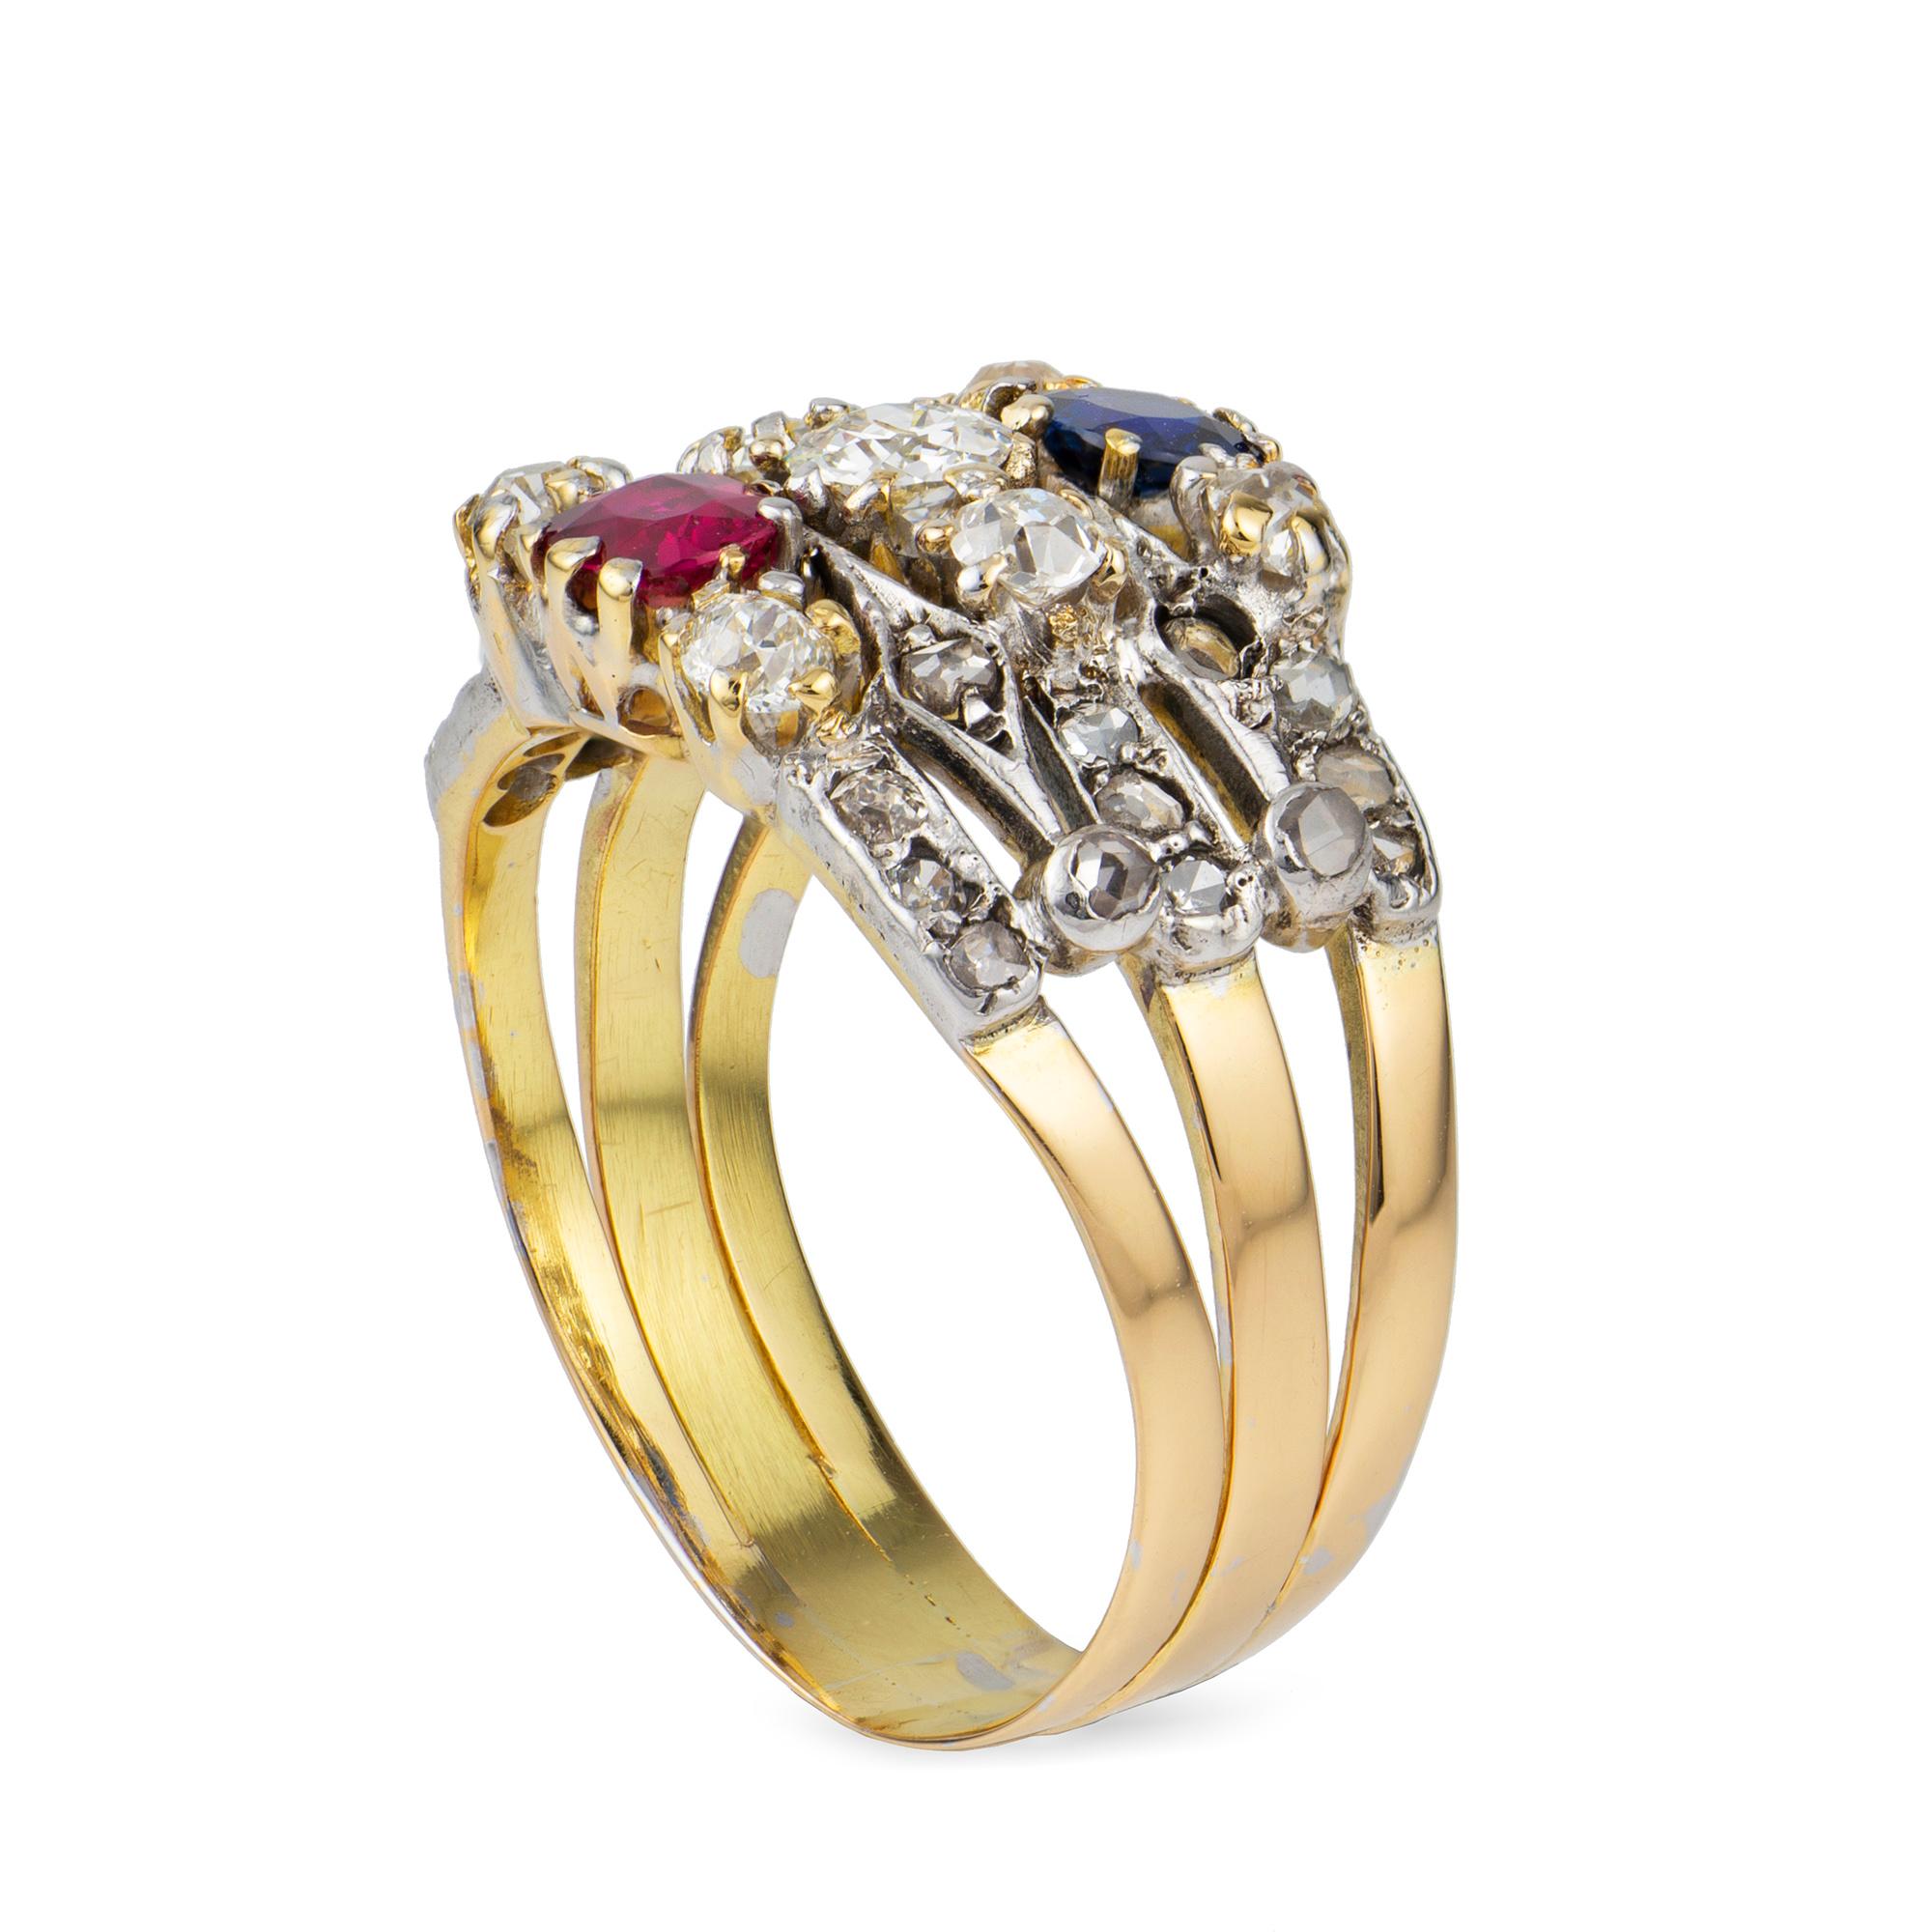 A Victorian ruby, sapphire and diamond harem ring, consisting of three bands, the one centrally-set with a ruby, the second with an old-cut diamond and the third with a sapphire, each set between two small old-cut diamonds and rose-cut diamond